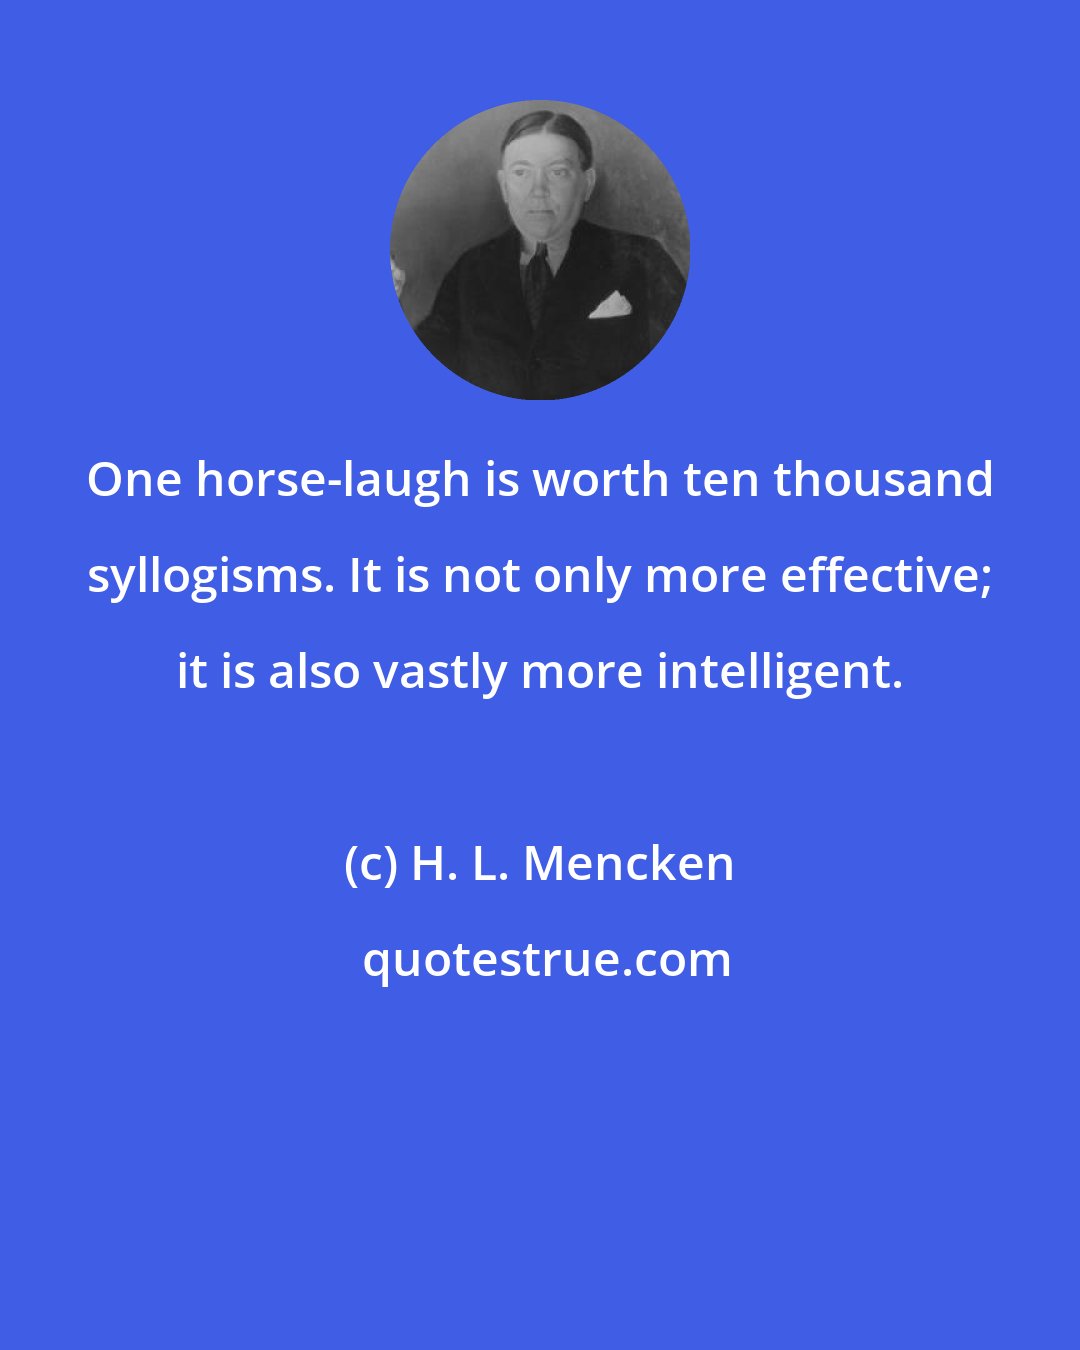 H. L. Mencken: One horse-laugh is worth ten thousand syllogisms. It is not only more effective; it is also vastly more intelligent.